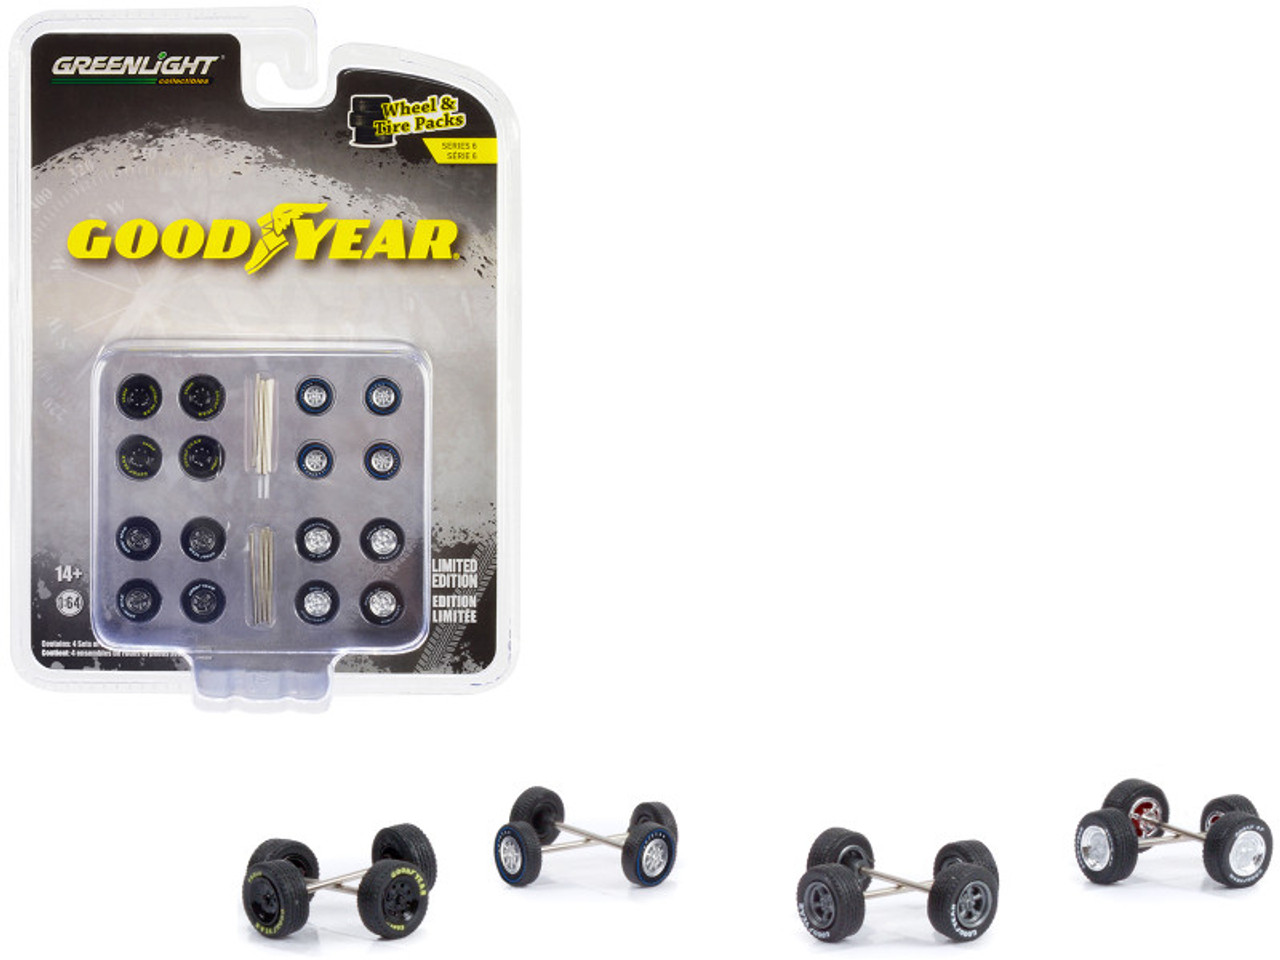 "Goodyear" Wheels and Tires Multipack Set of 24 pieces "Wheel & Tire Packs" Series 6 1/64 Scale Models by Greenlight